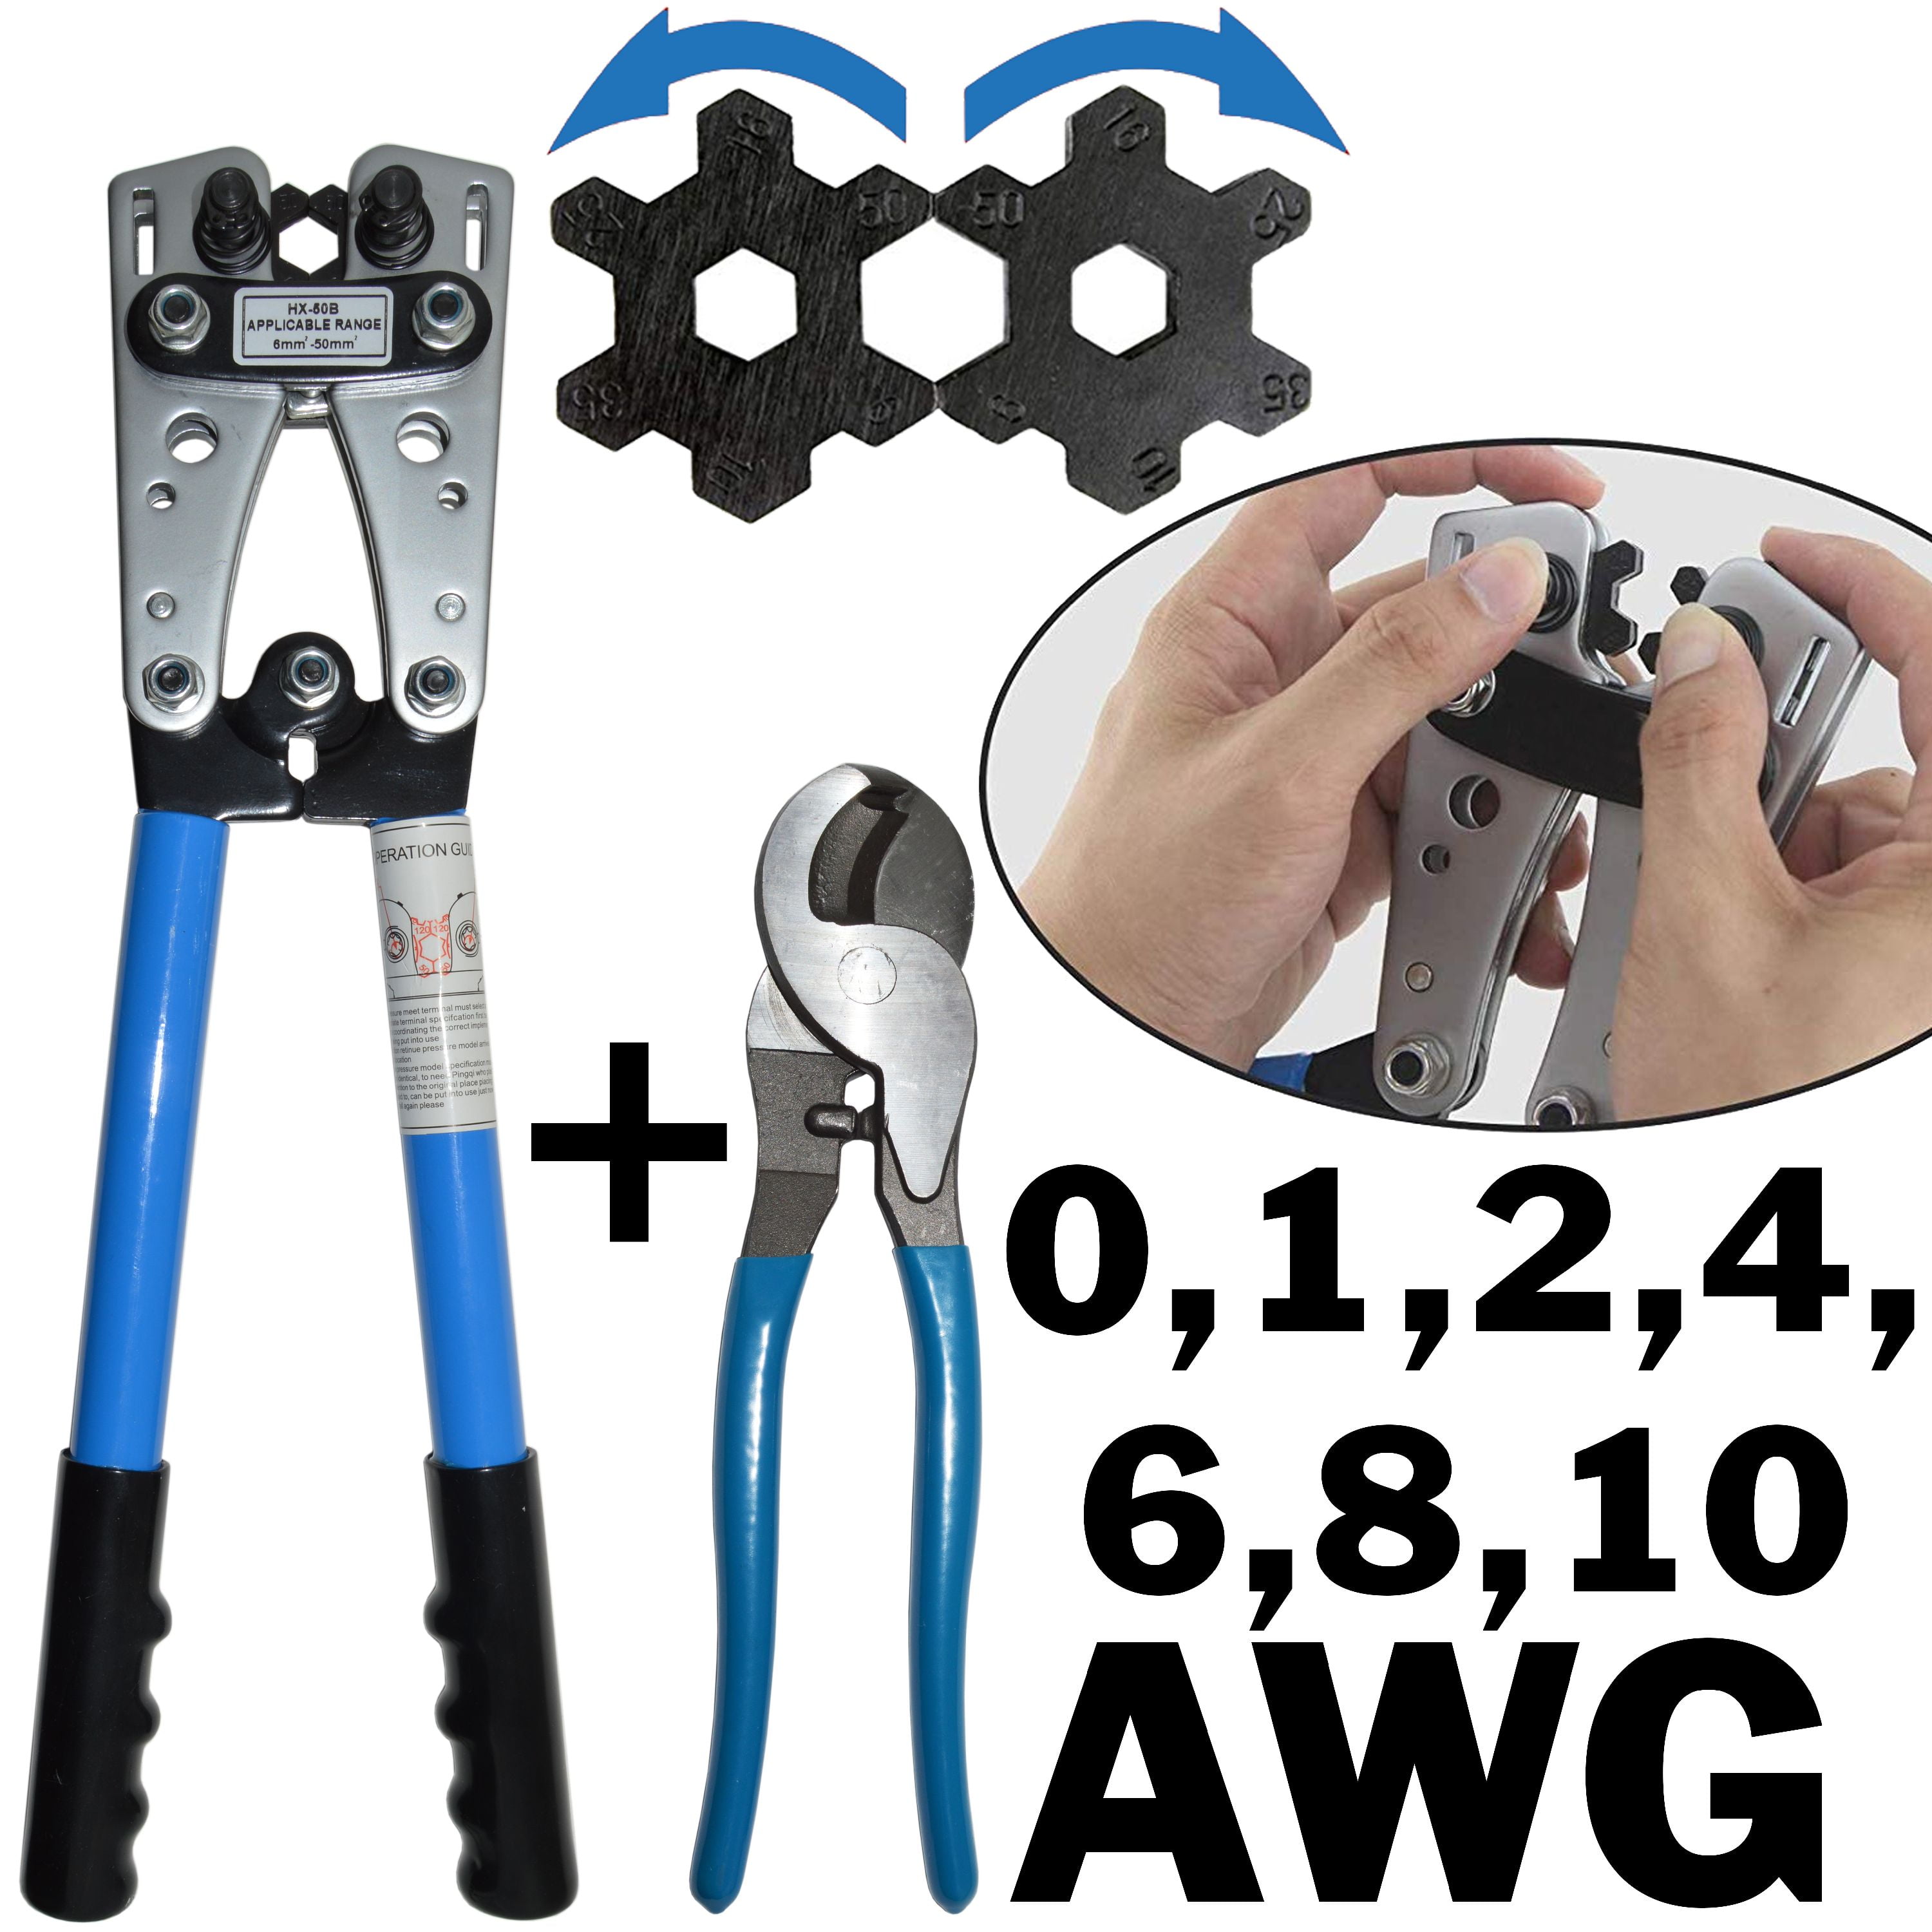 6-50mm² Ratchet Crimper Cable Wire Terminals Electrical Plier Crimping Tool UK 